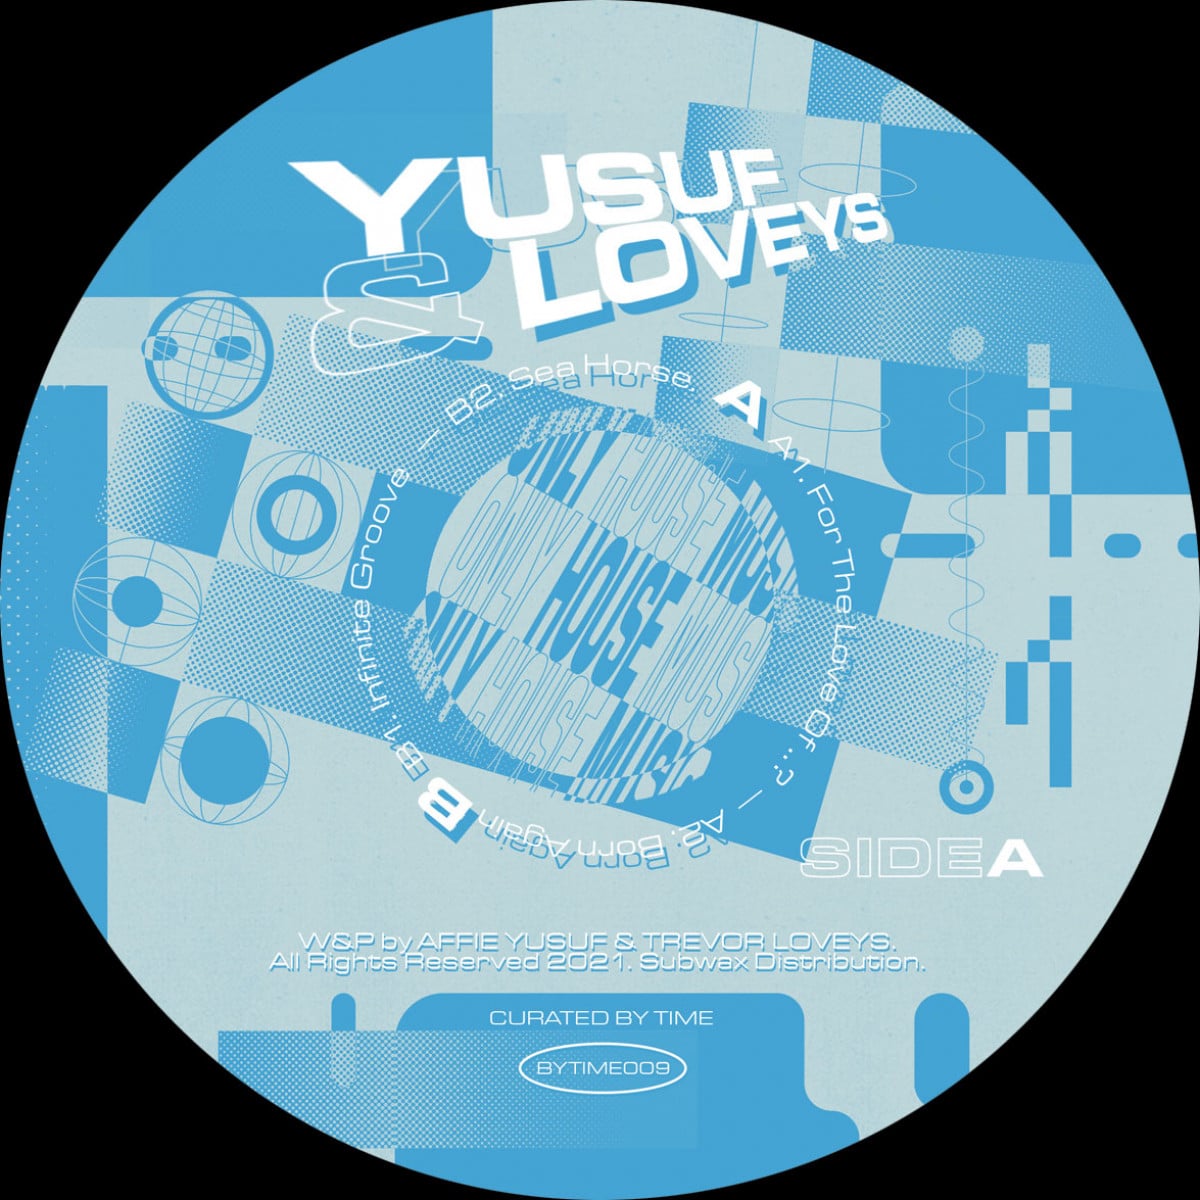 Yusuf/Loveys - Only House Music - BYTIME009 - CURATED BY TIME